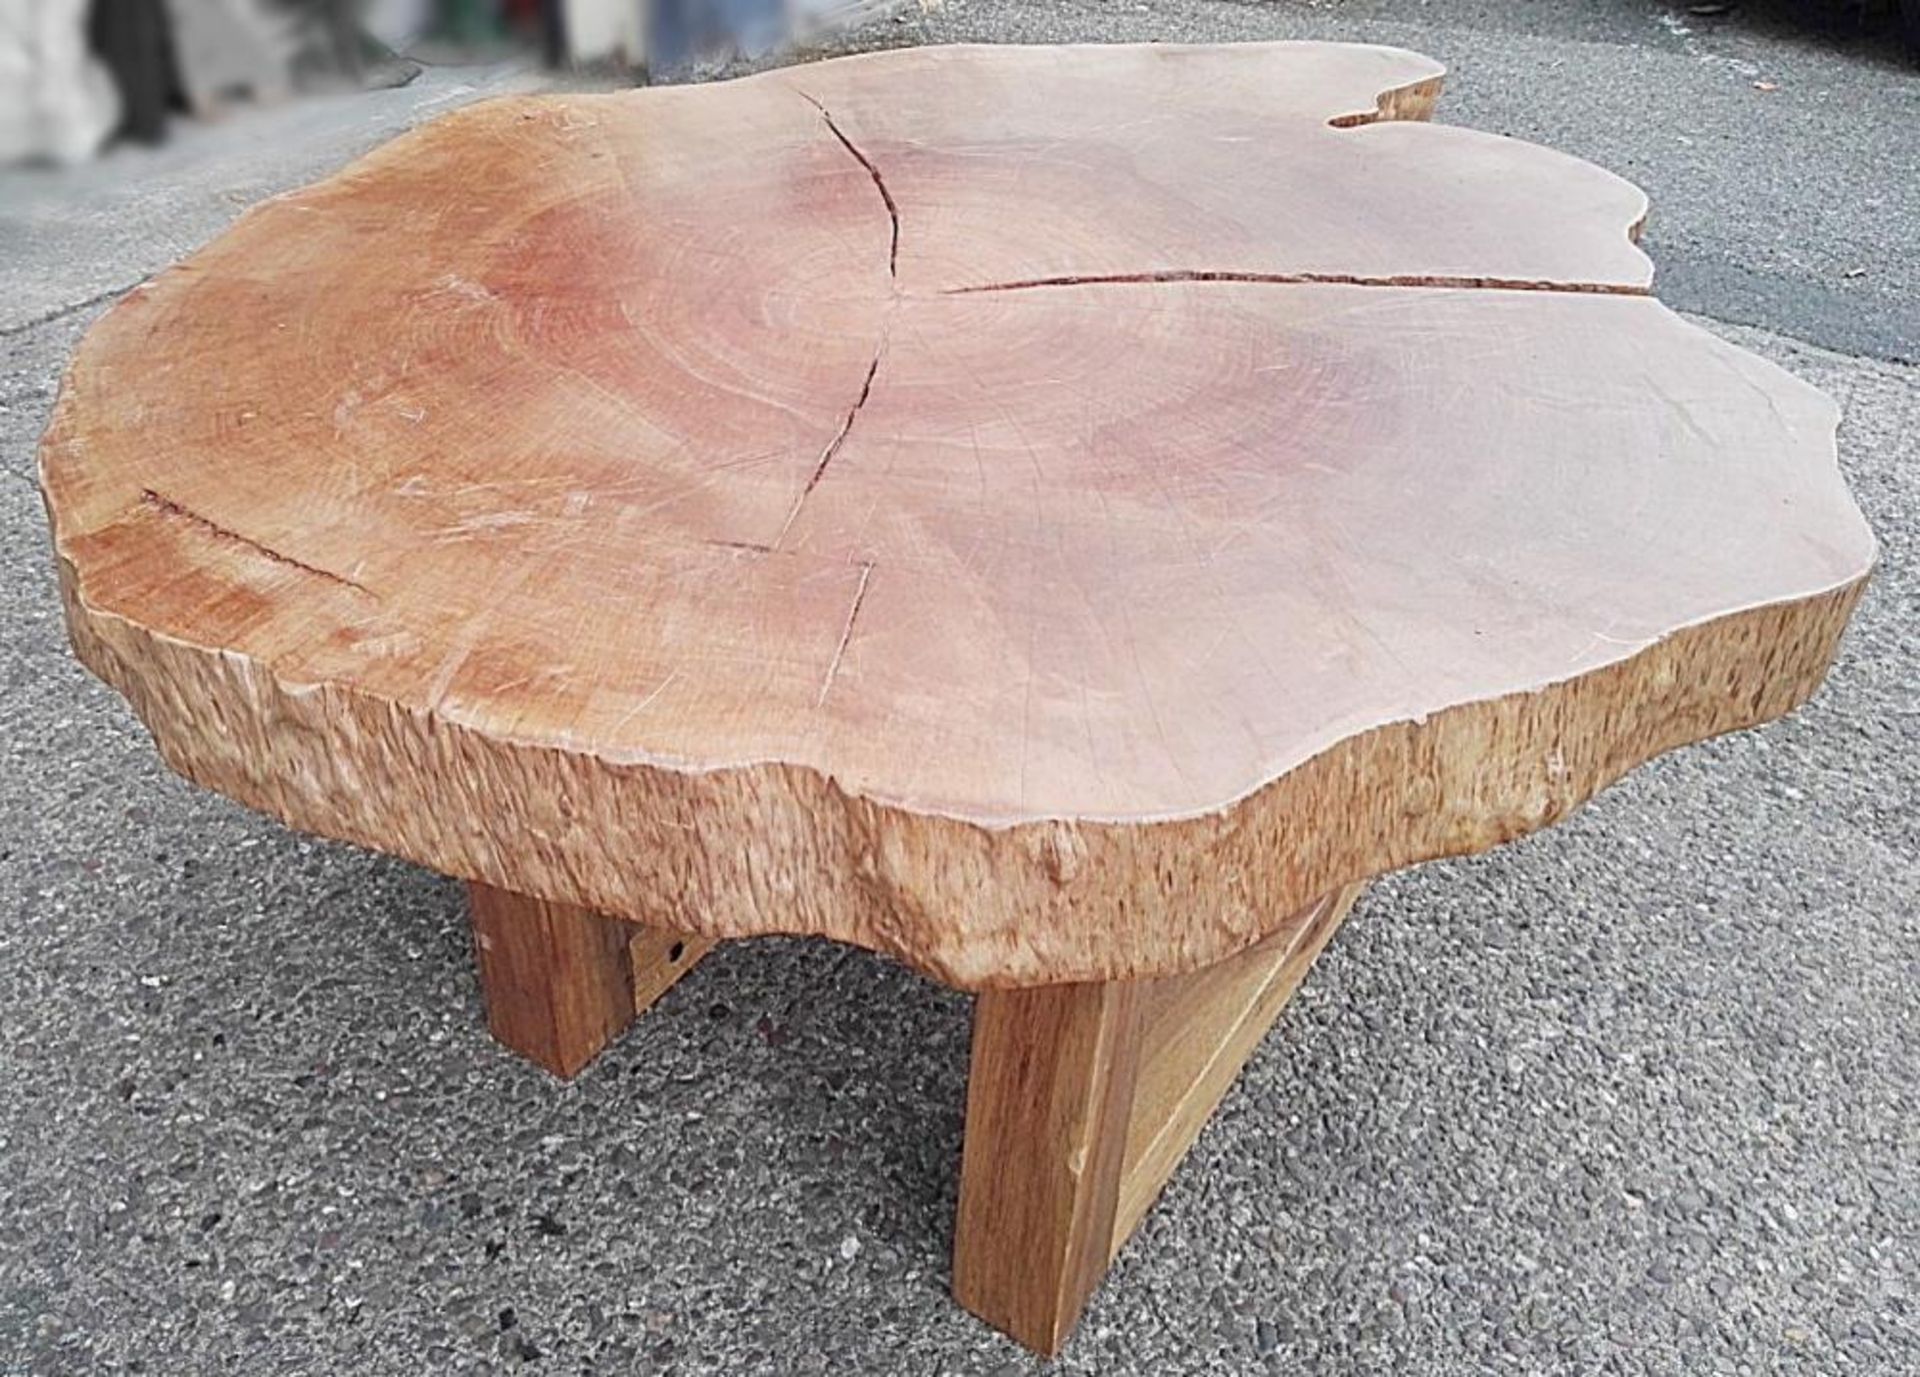 1 x Unique Reclaimed Solid Tree Trunk Coffee Table - Dimensions (approx): W152 x D129 x H63.3cm - Re